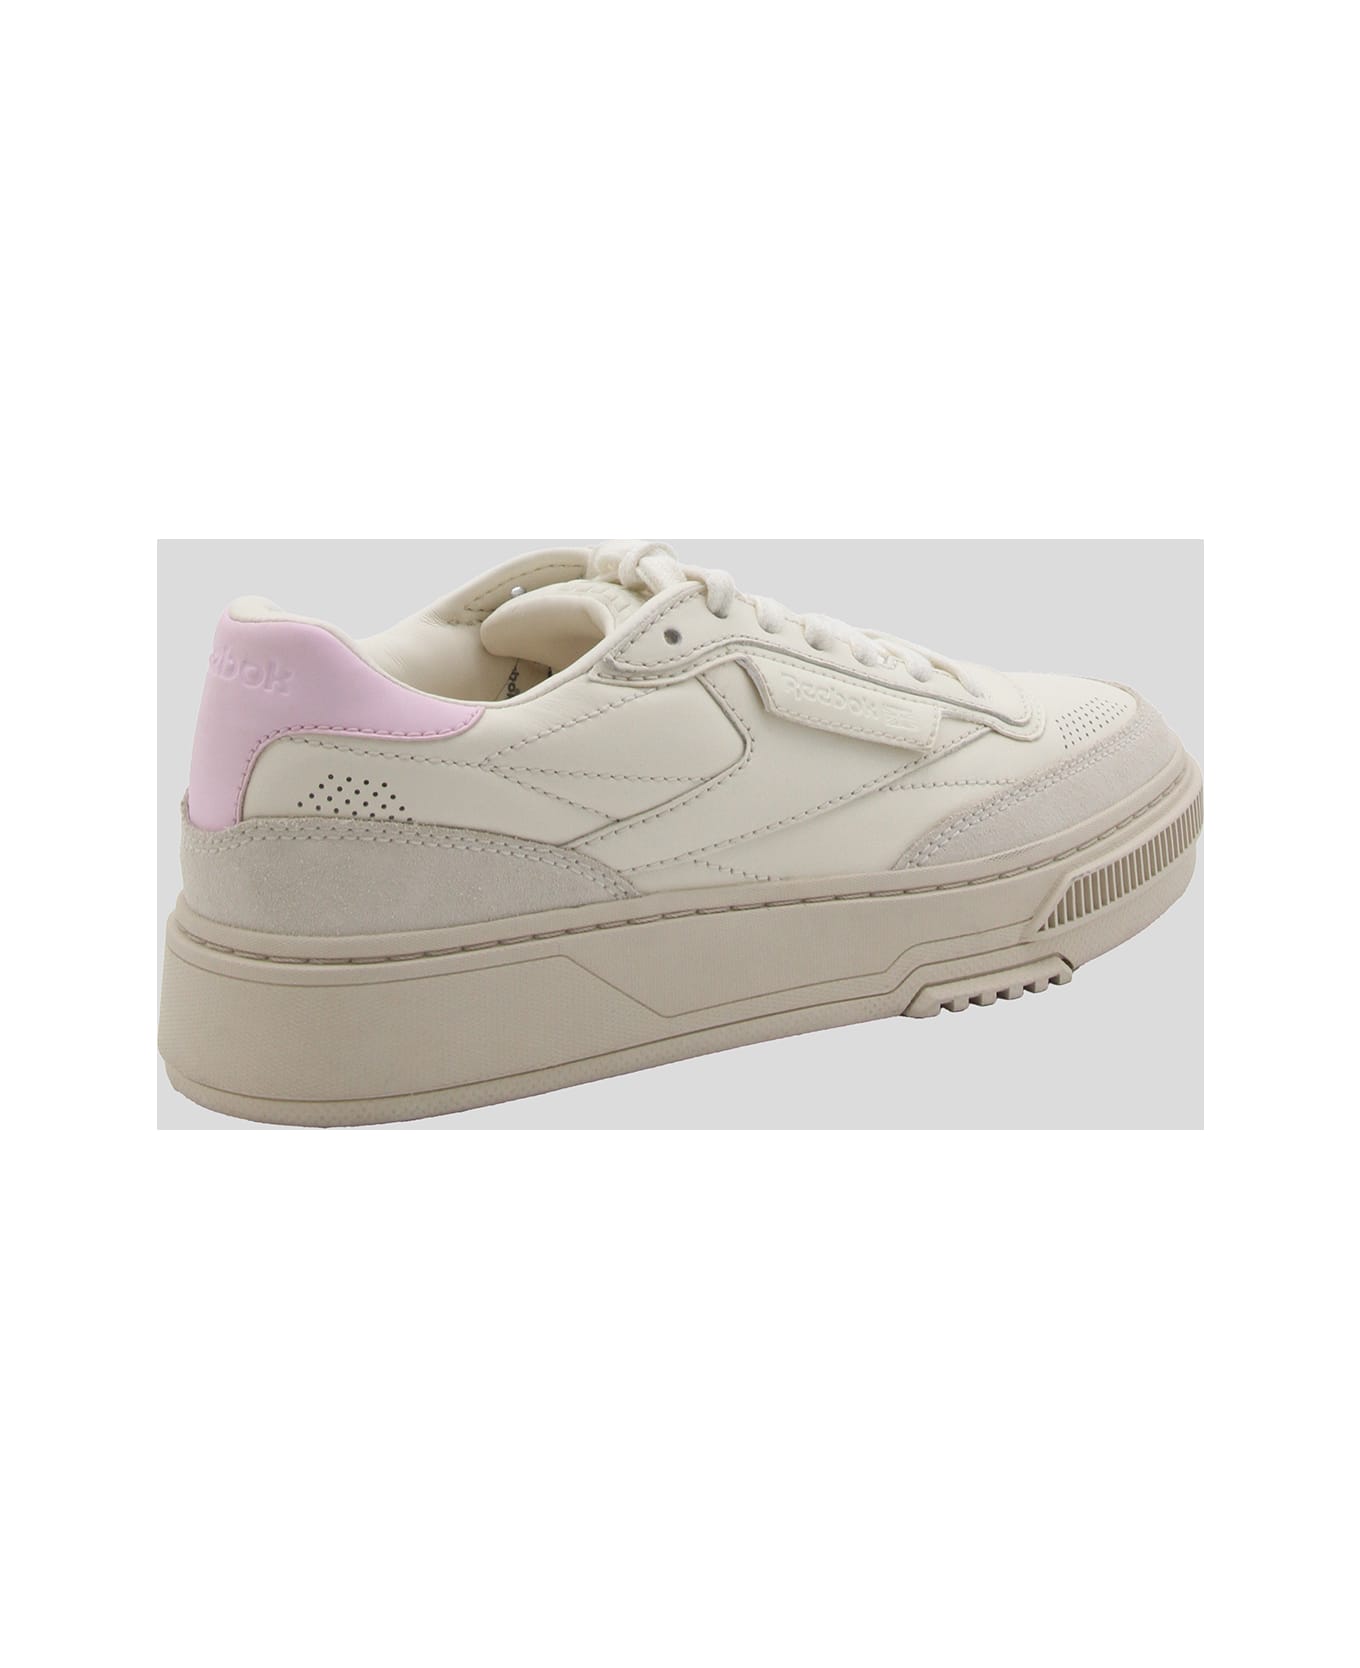 Reebok White And Pink Leather C Ltd Sneakers - Light pink スニーカー